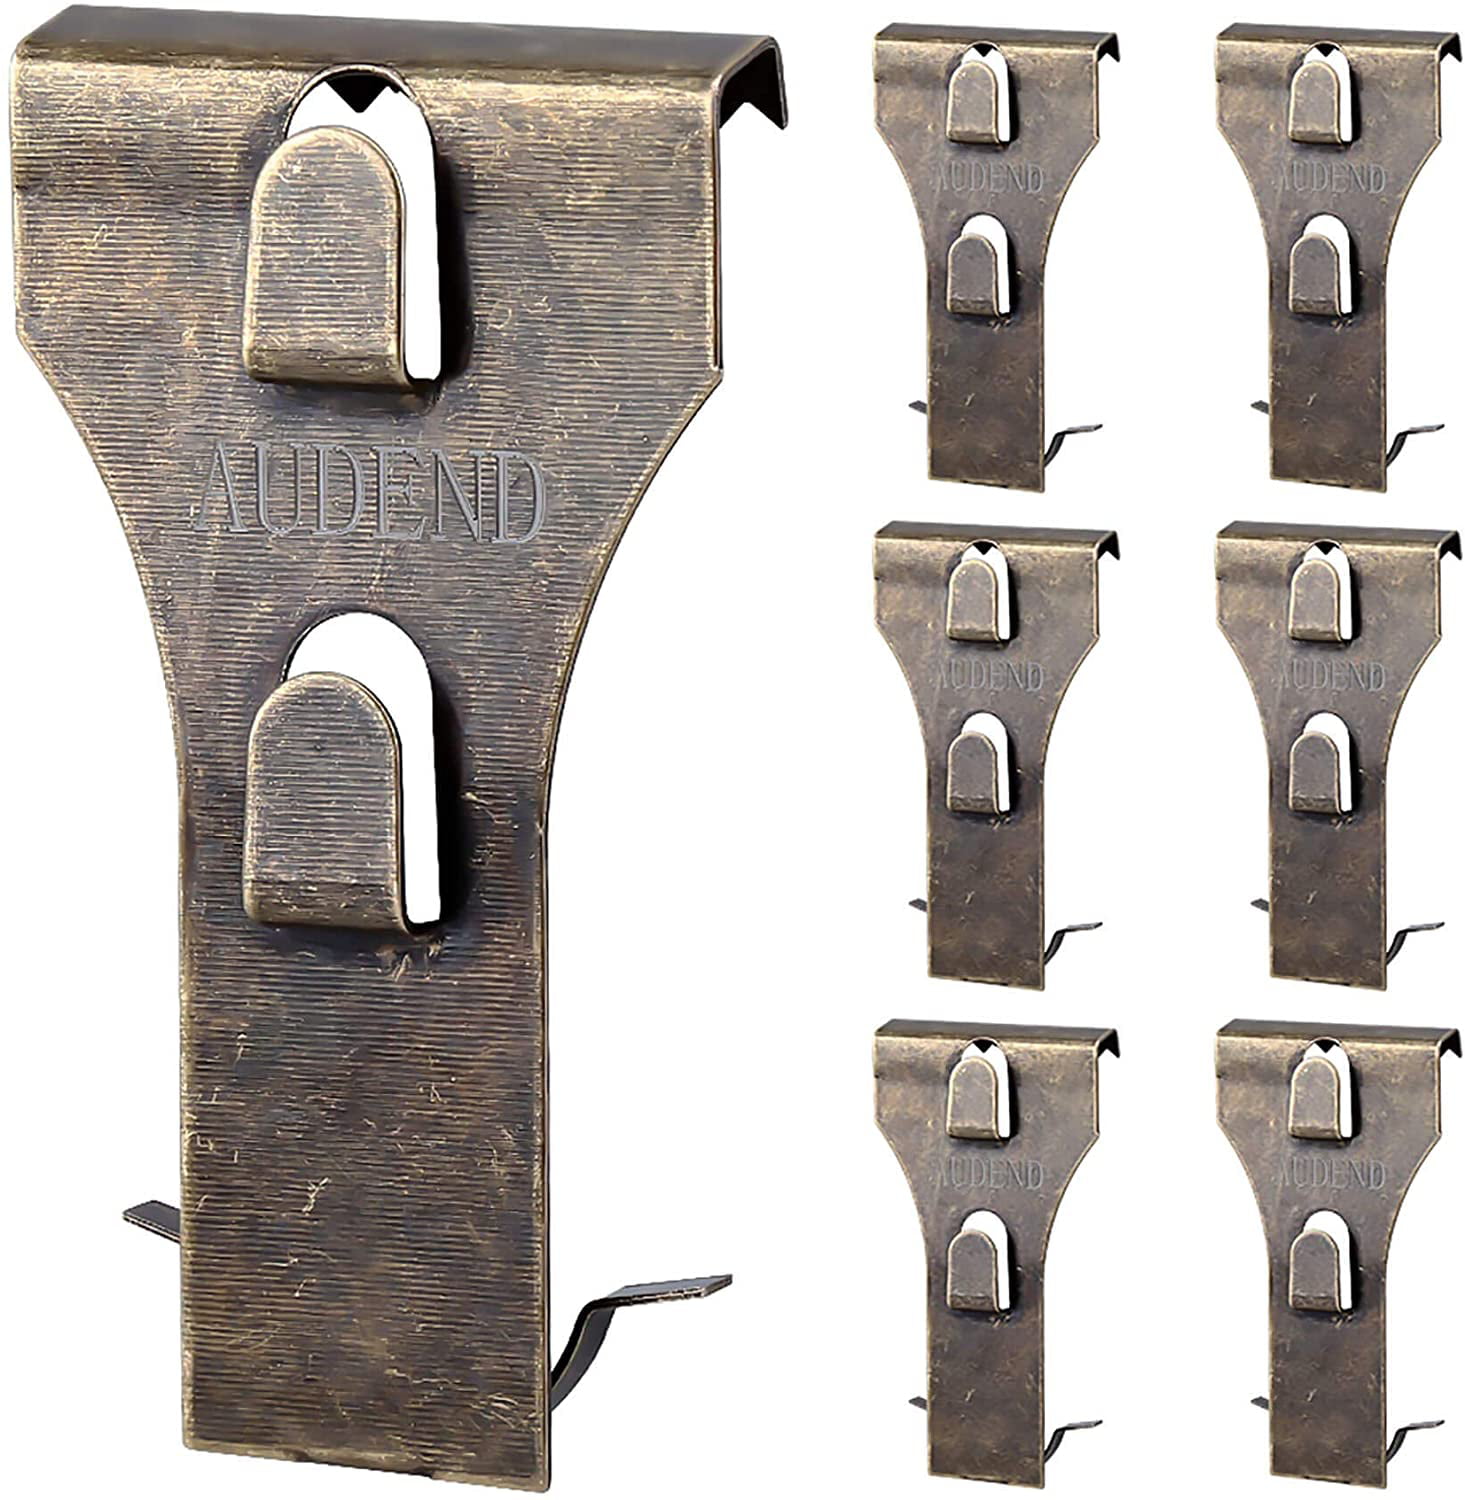 Fits Brick 2-1/4 inch to 2-1/2 inch in Height Wall Pictures Wreath Lights Hanger Metal Hooks Fastener 5 Pack Brick Clips for Hanging 